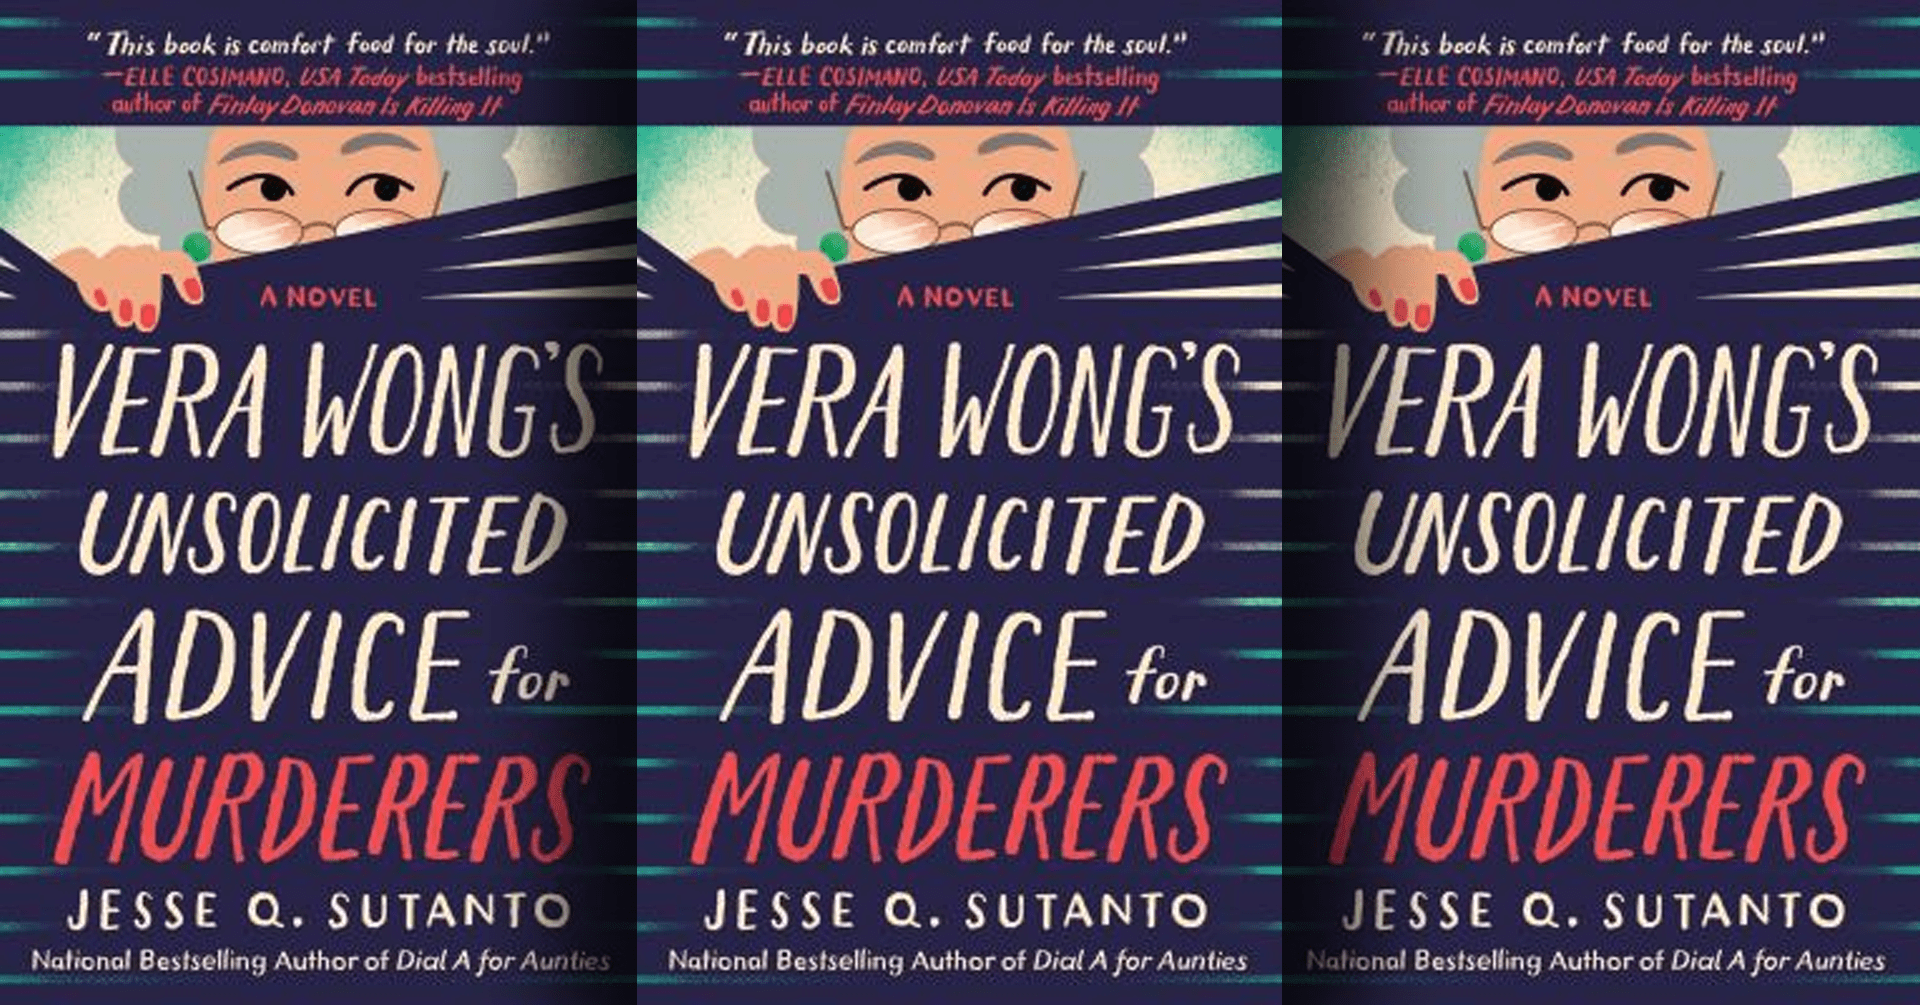 Vera Wong's Unsolicited Advice for Murderers by Jessie Sutanto (book cover)